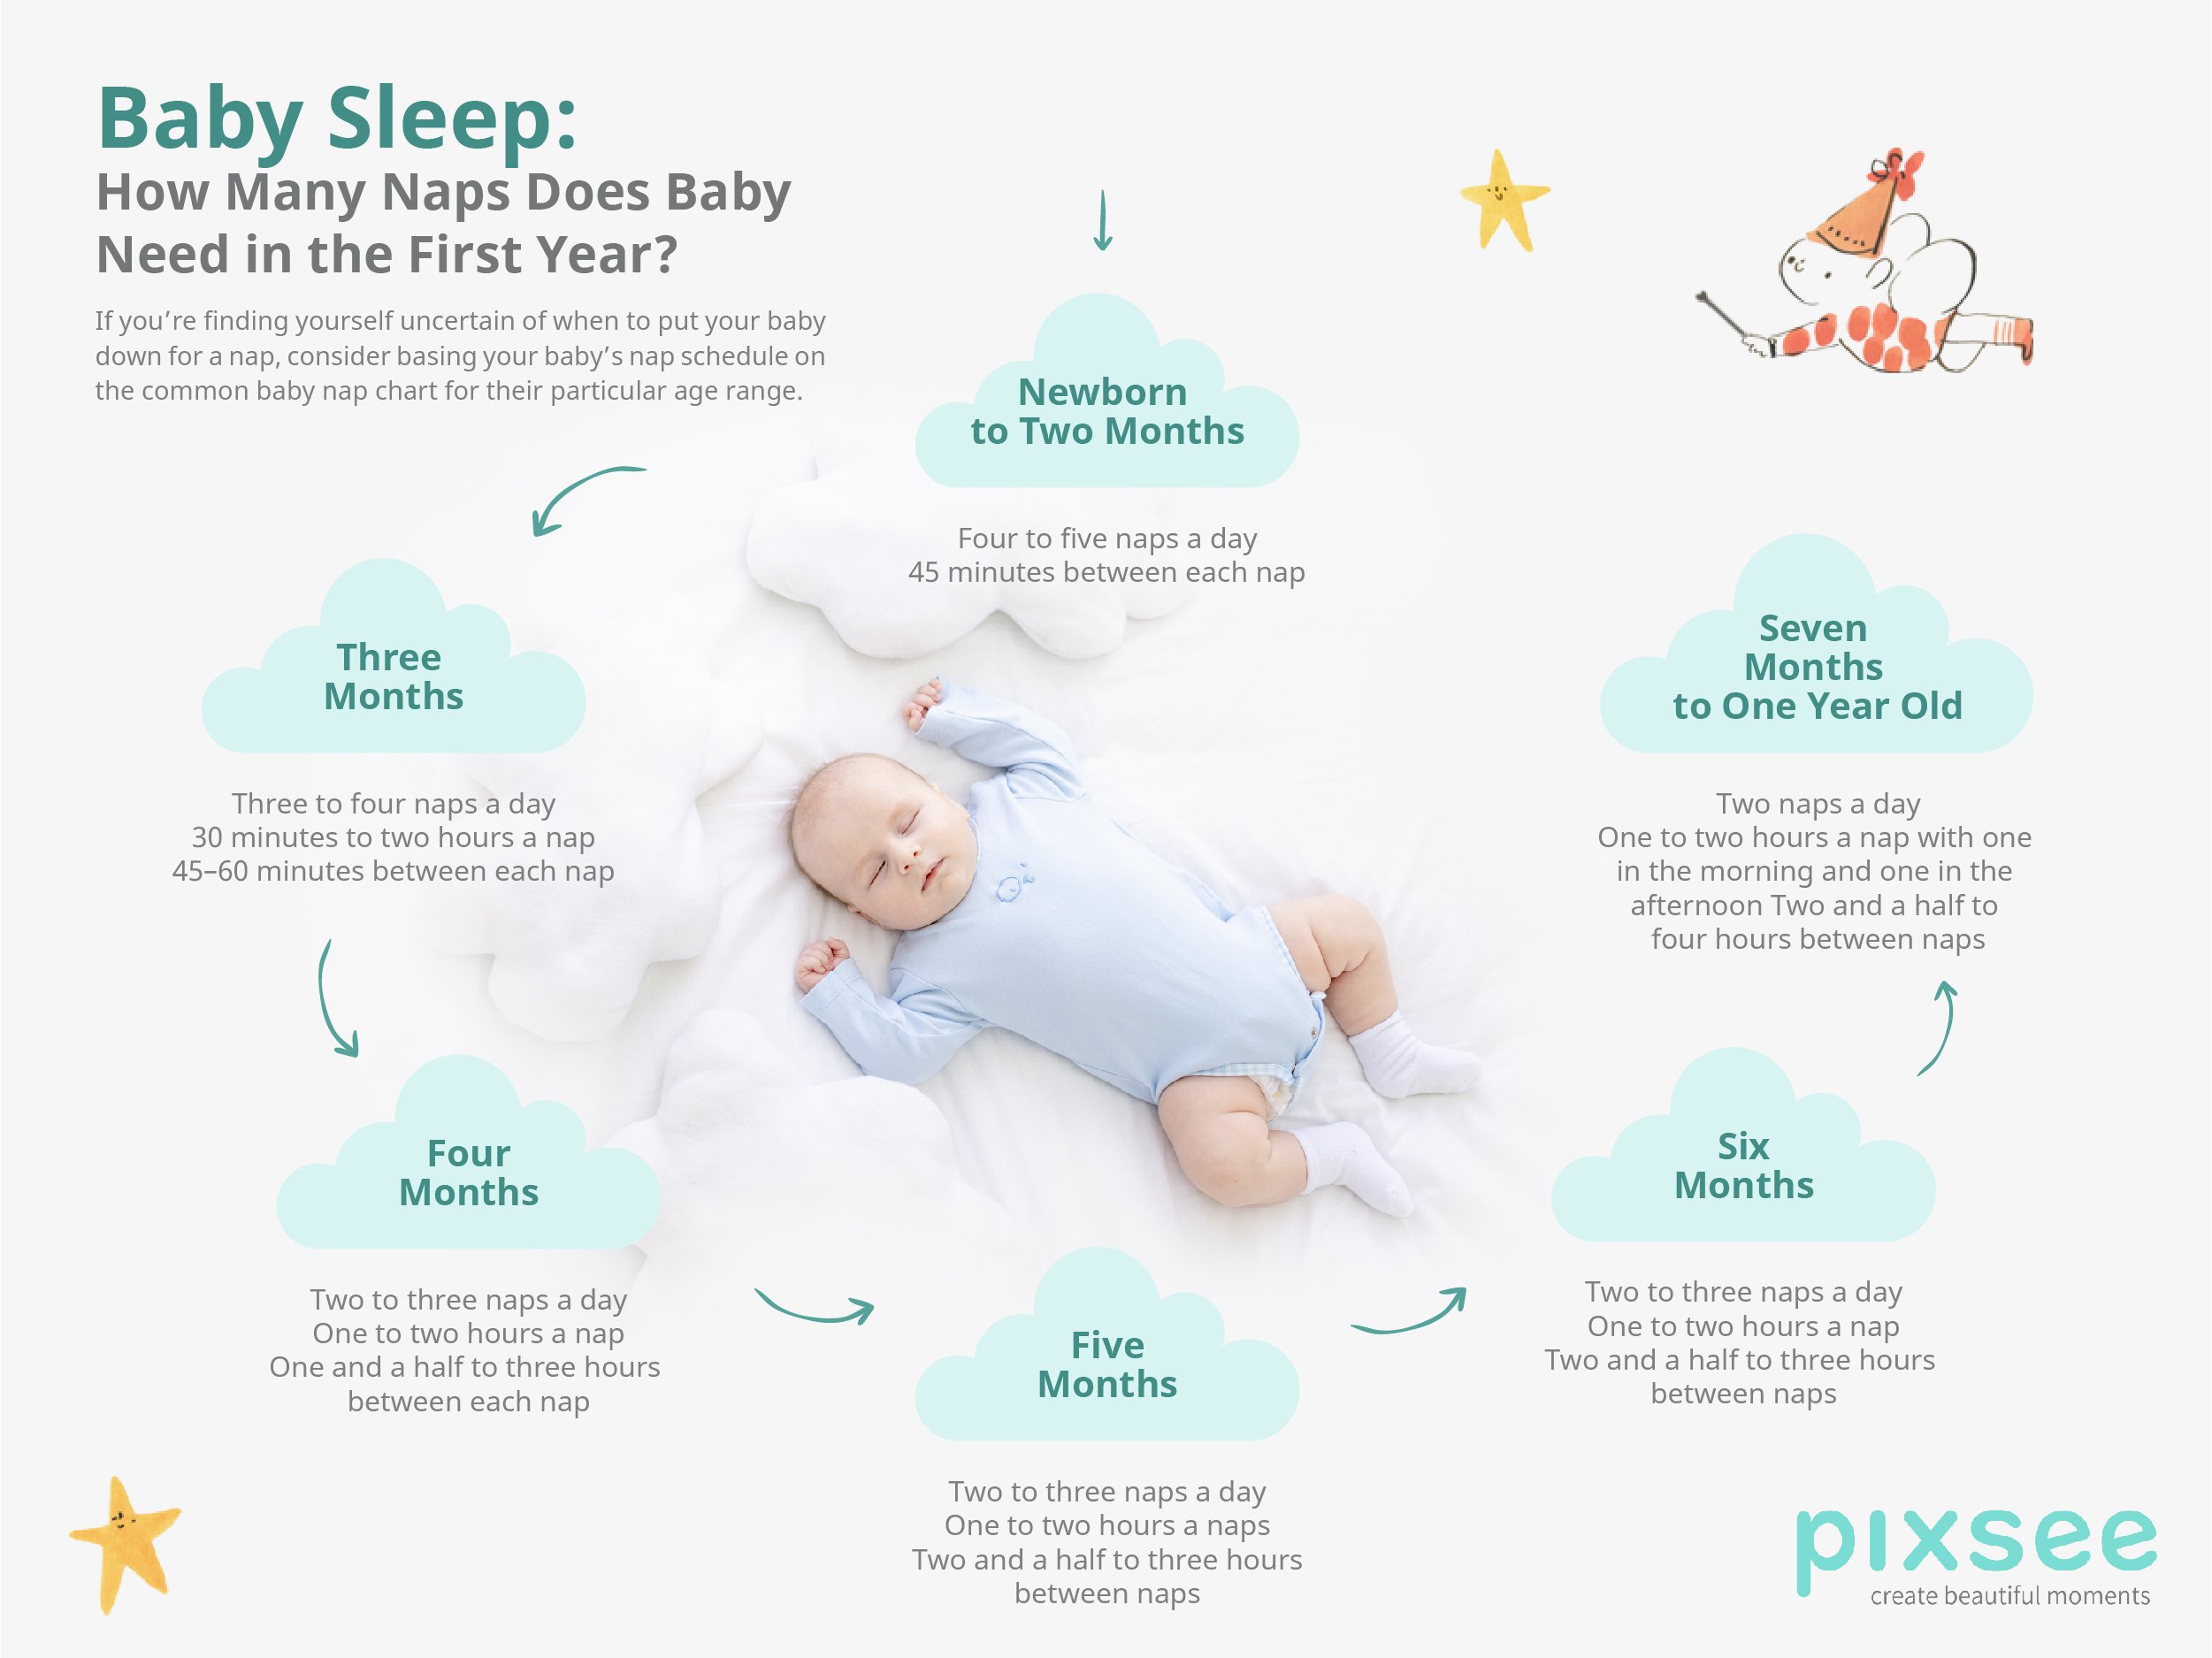 How Many Naps Does Baby Need in the First Year Infographic